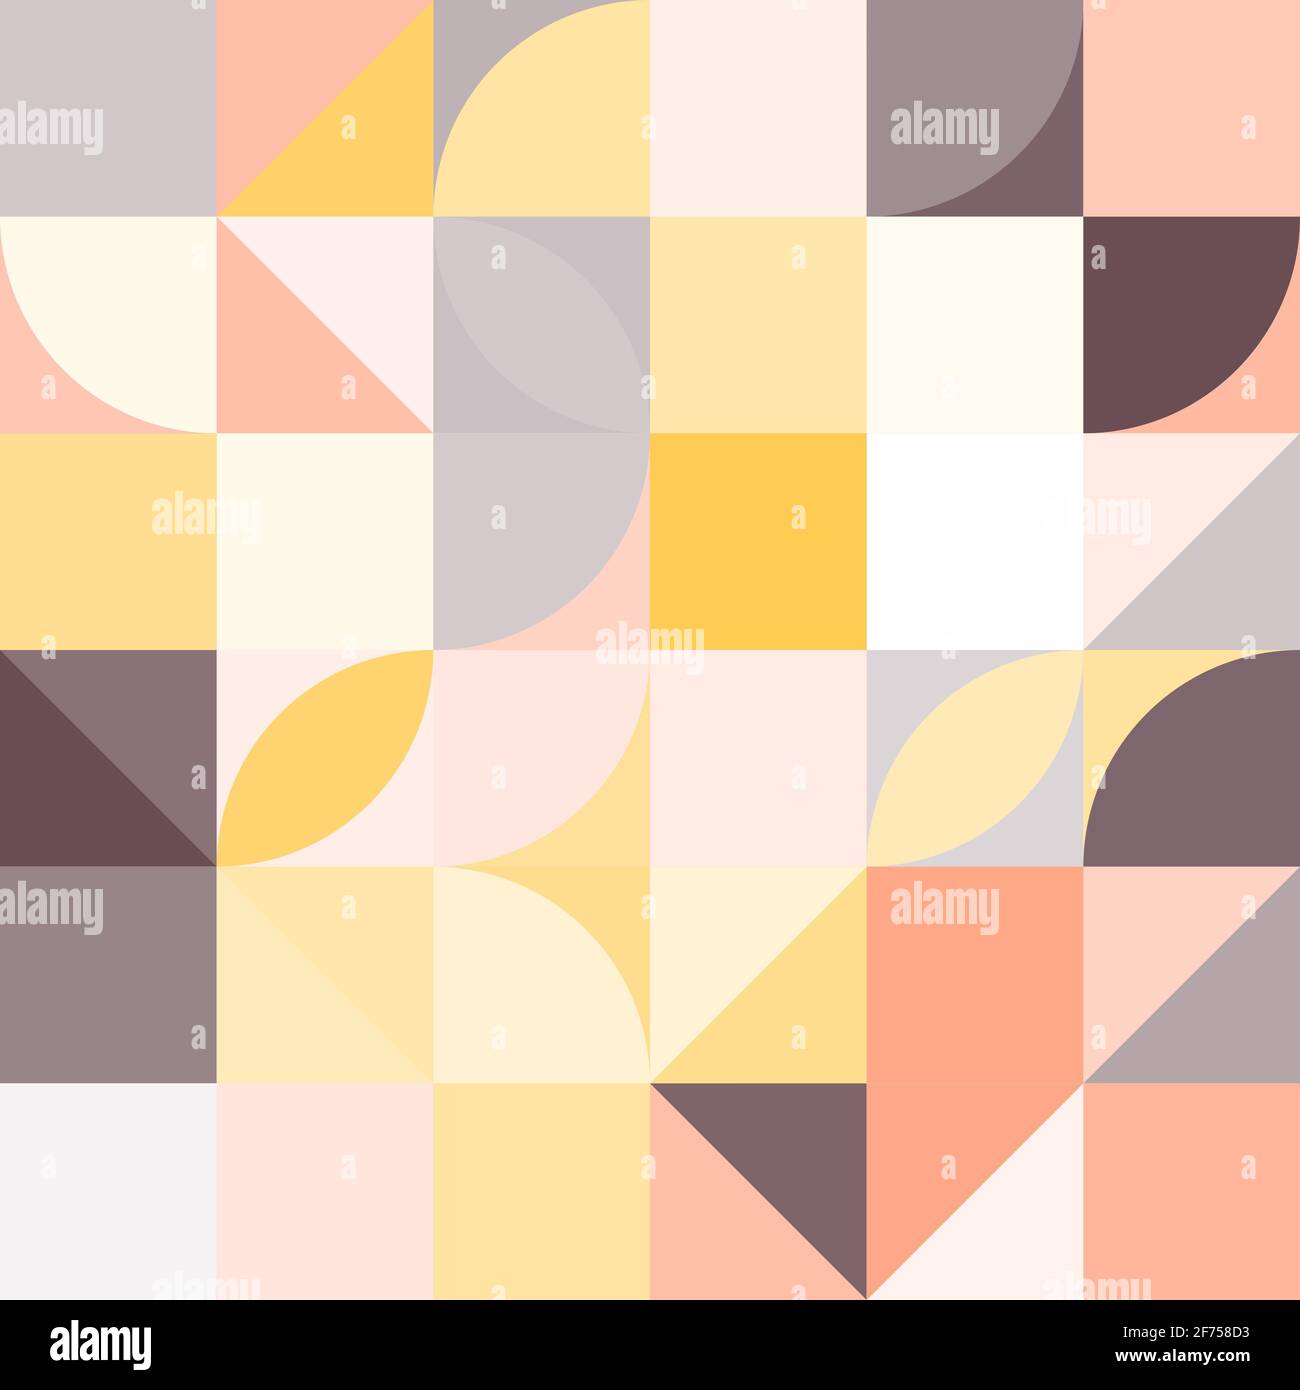 Simple clean abstract bauhaus pattern Stock Photo